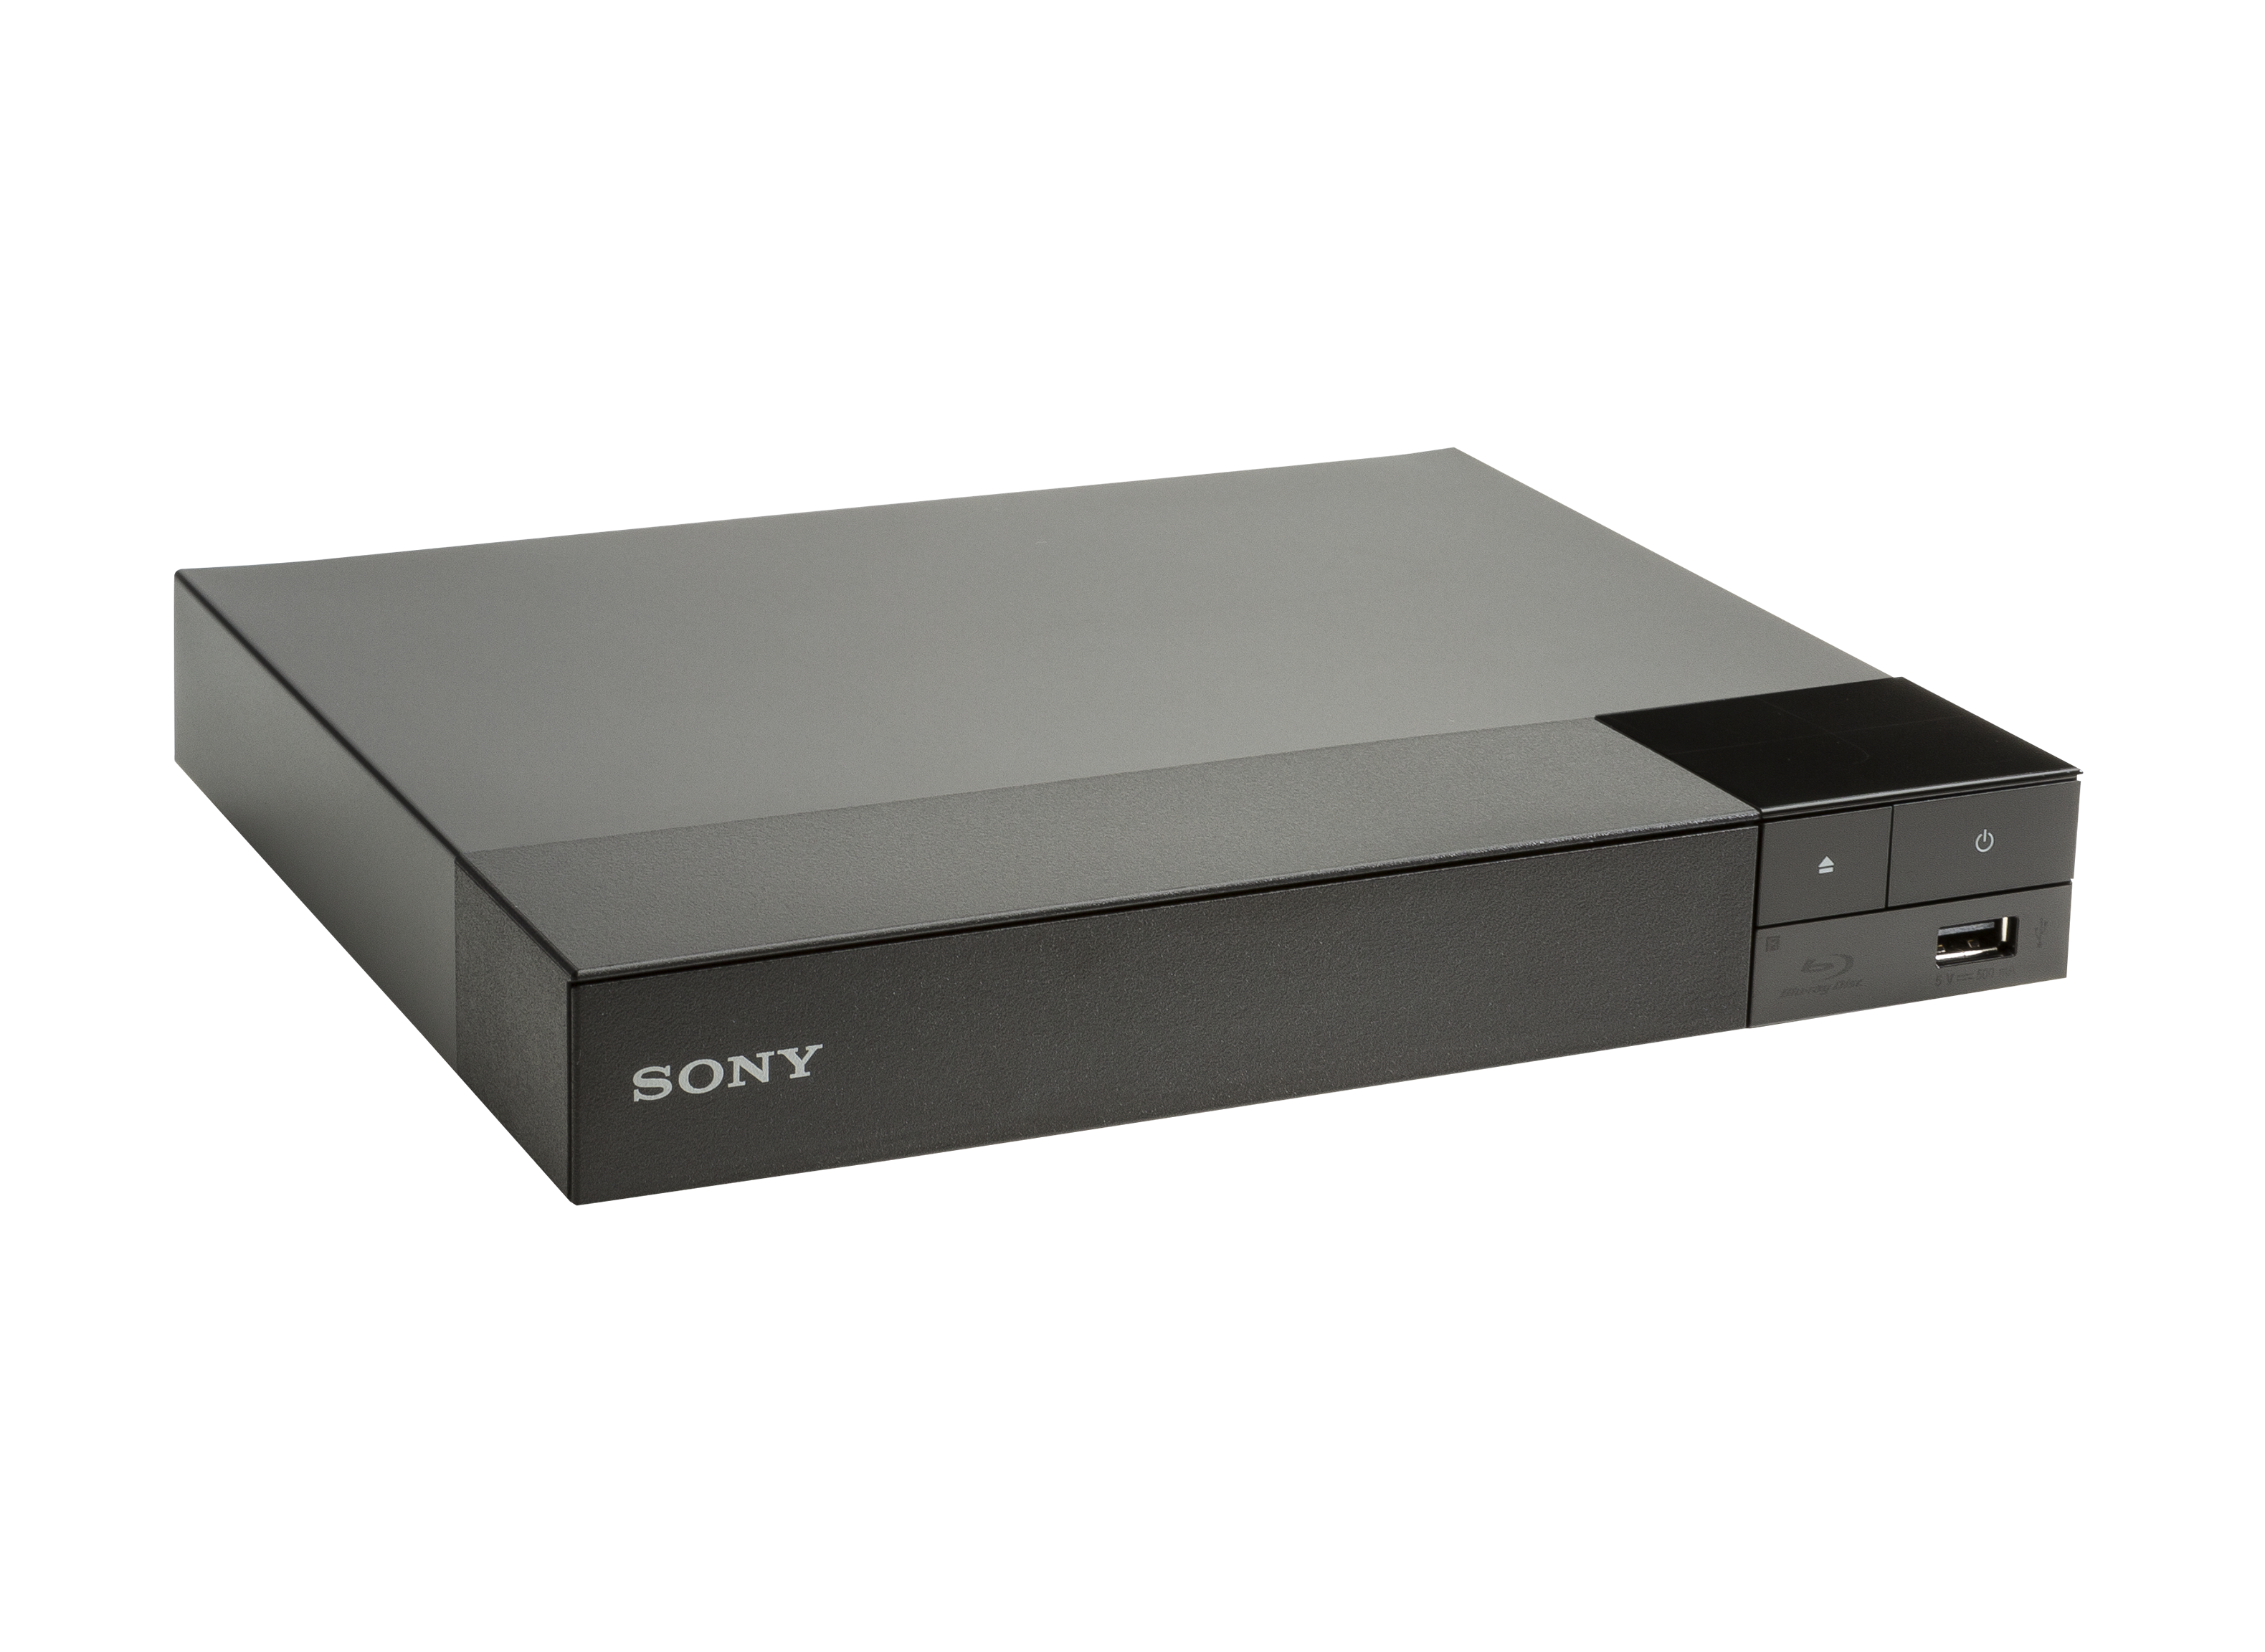 Sony BDP-S1700 Blu-Ray Player Review - Consumer Reports